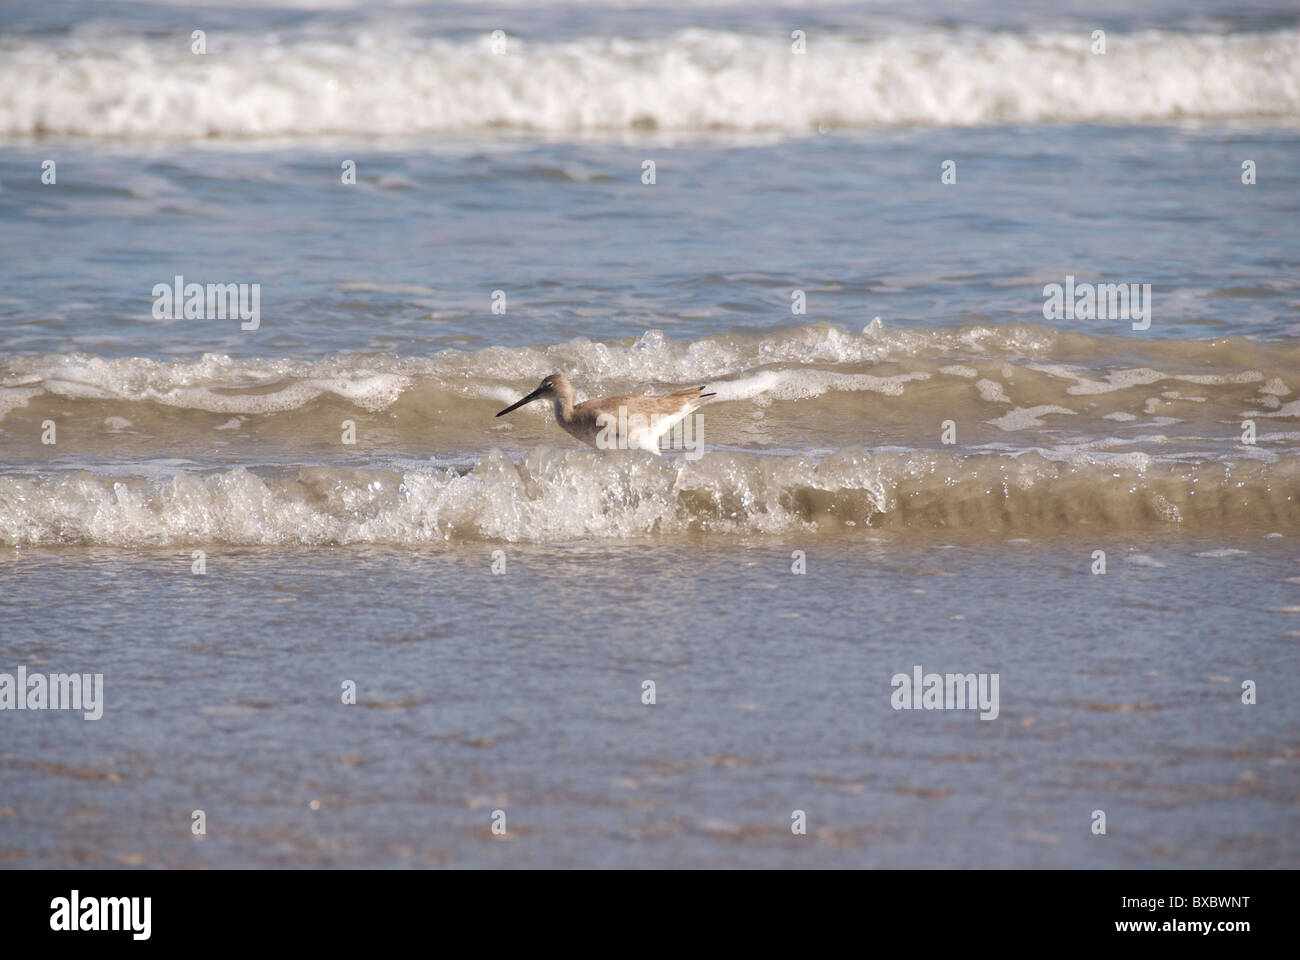 Shorebird, probably of the sandpiper family, walking in surf, looking for food, Cocoa Beach, Florida, USA Stock Photo